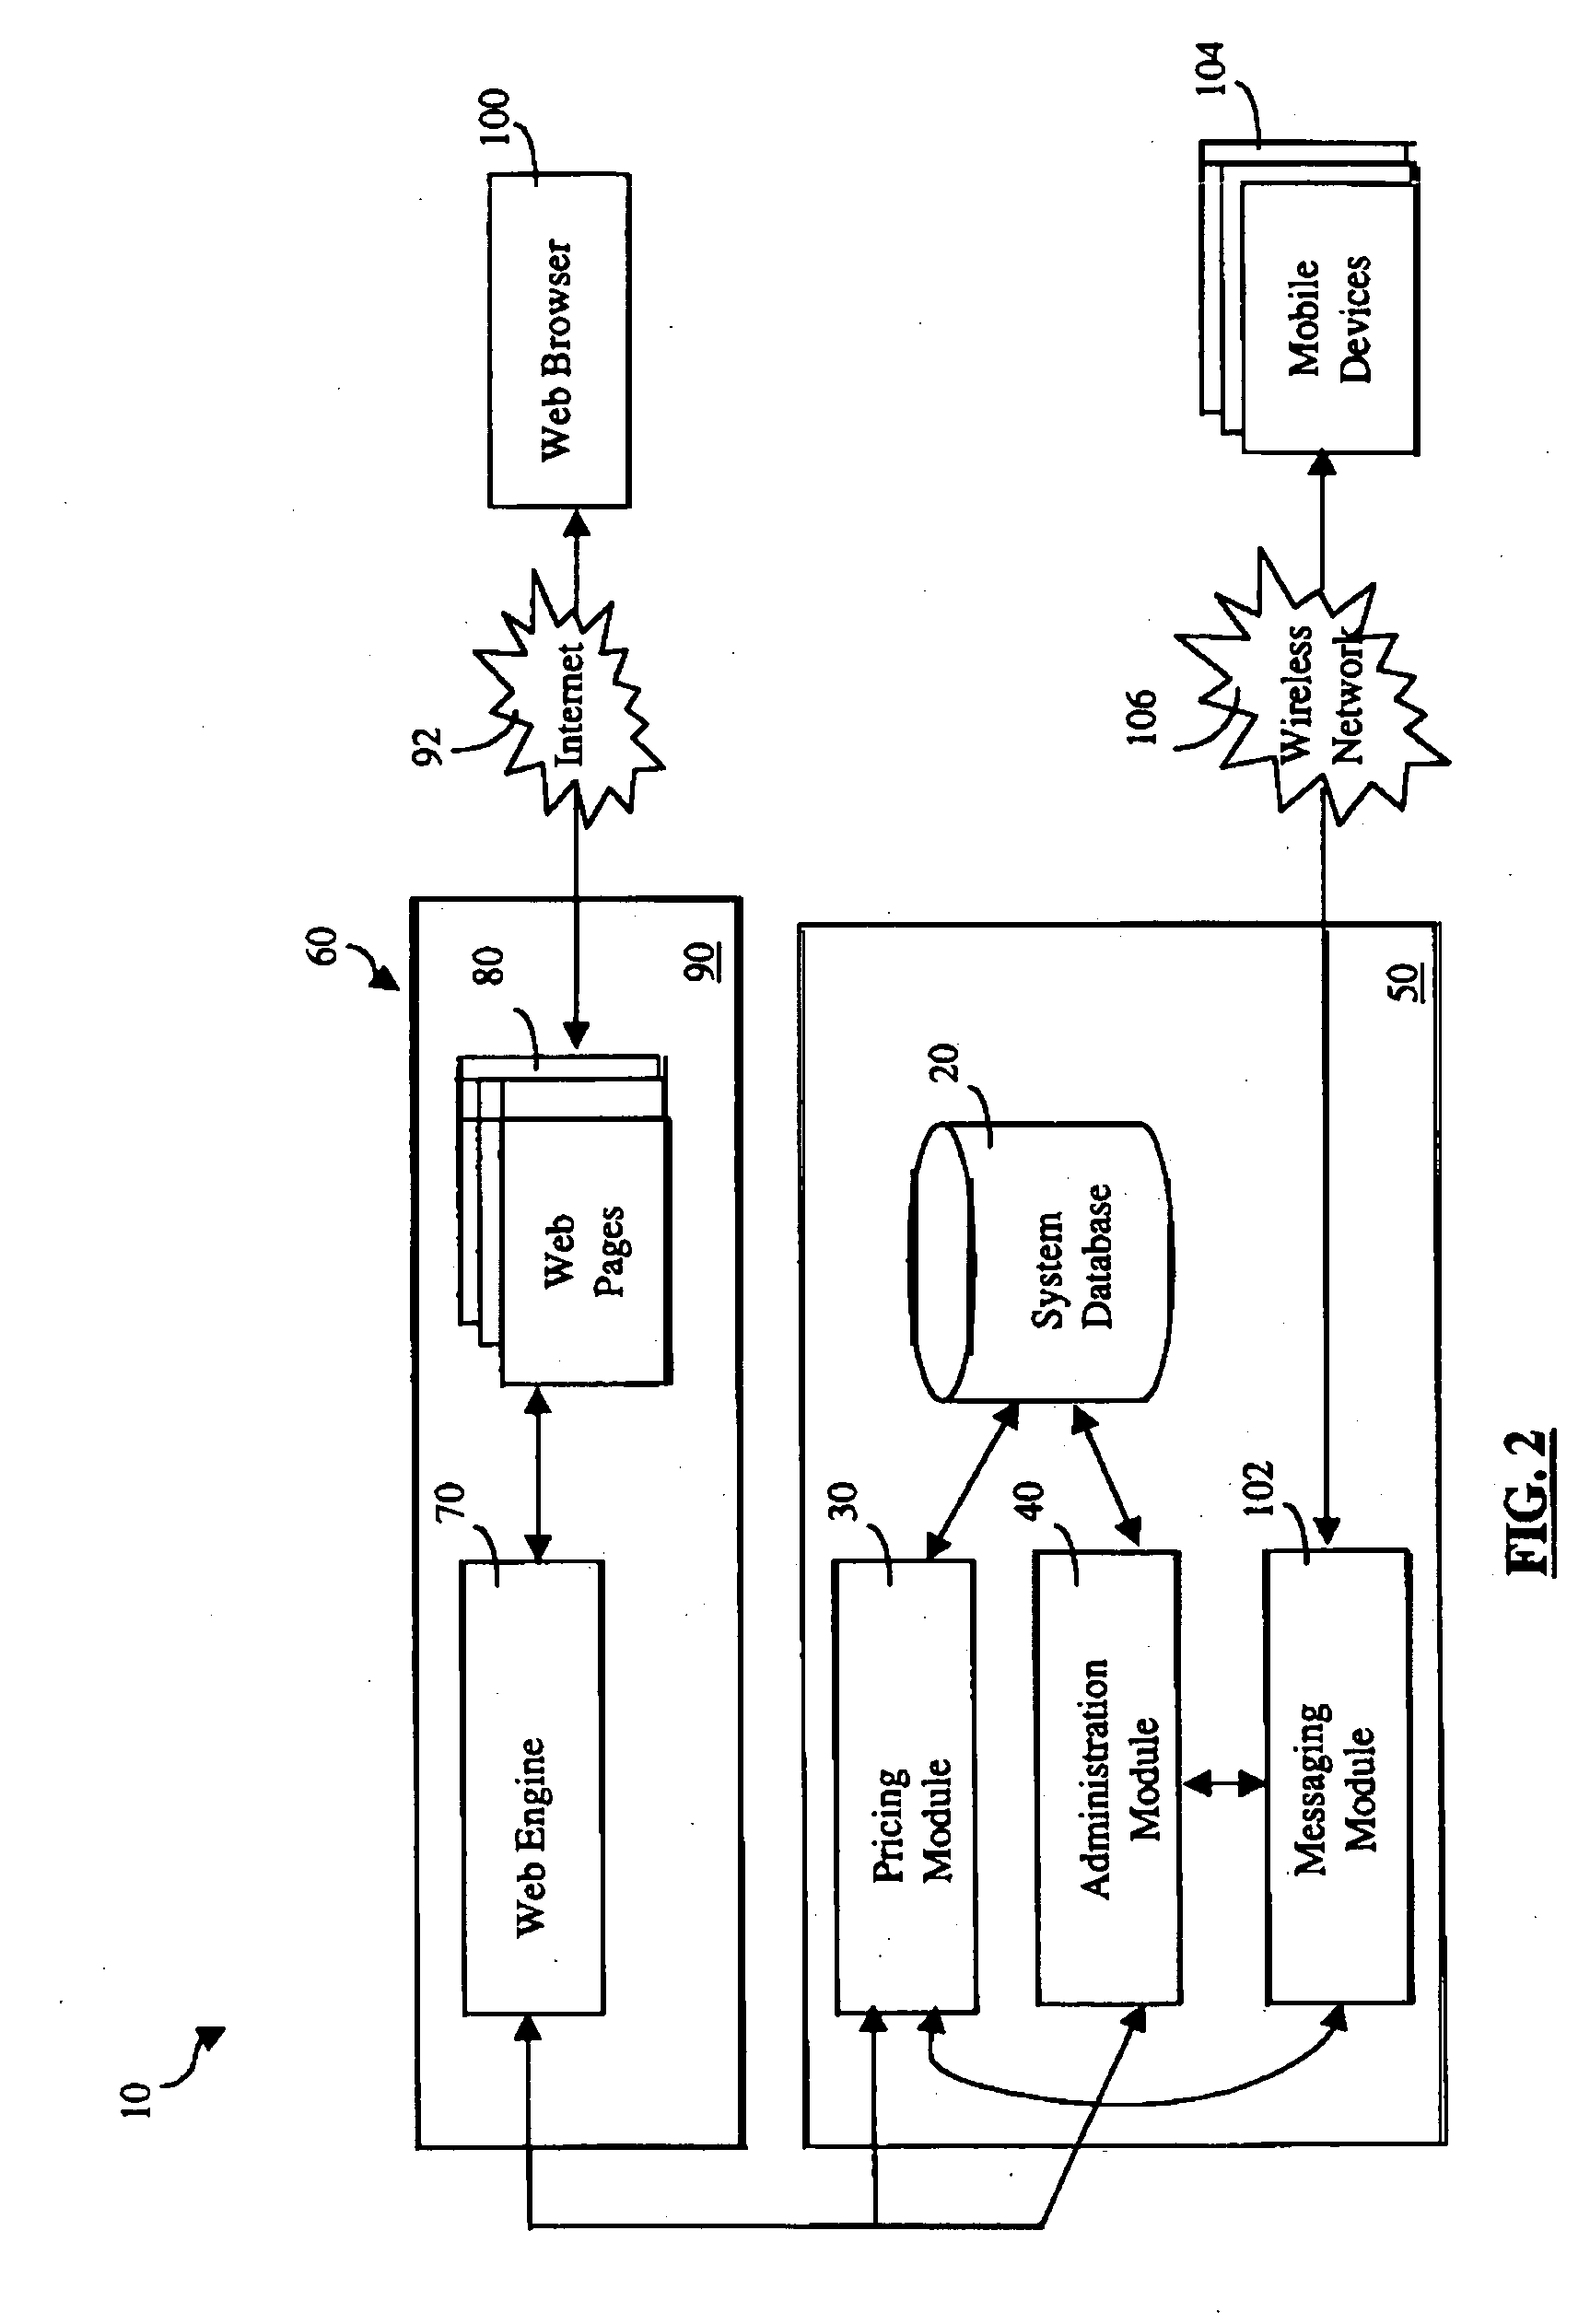 System and method for facilitating the real-time pricing, sale and appraisal of used vehicles